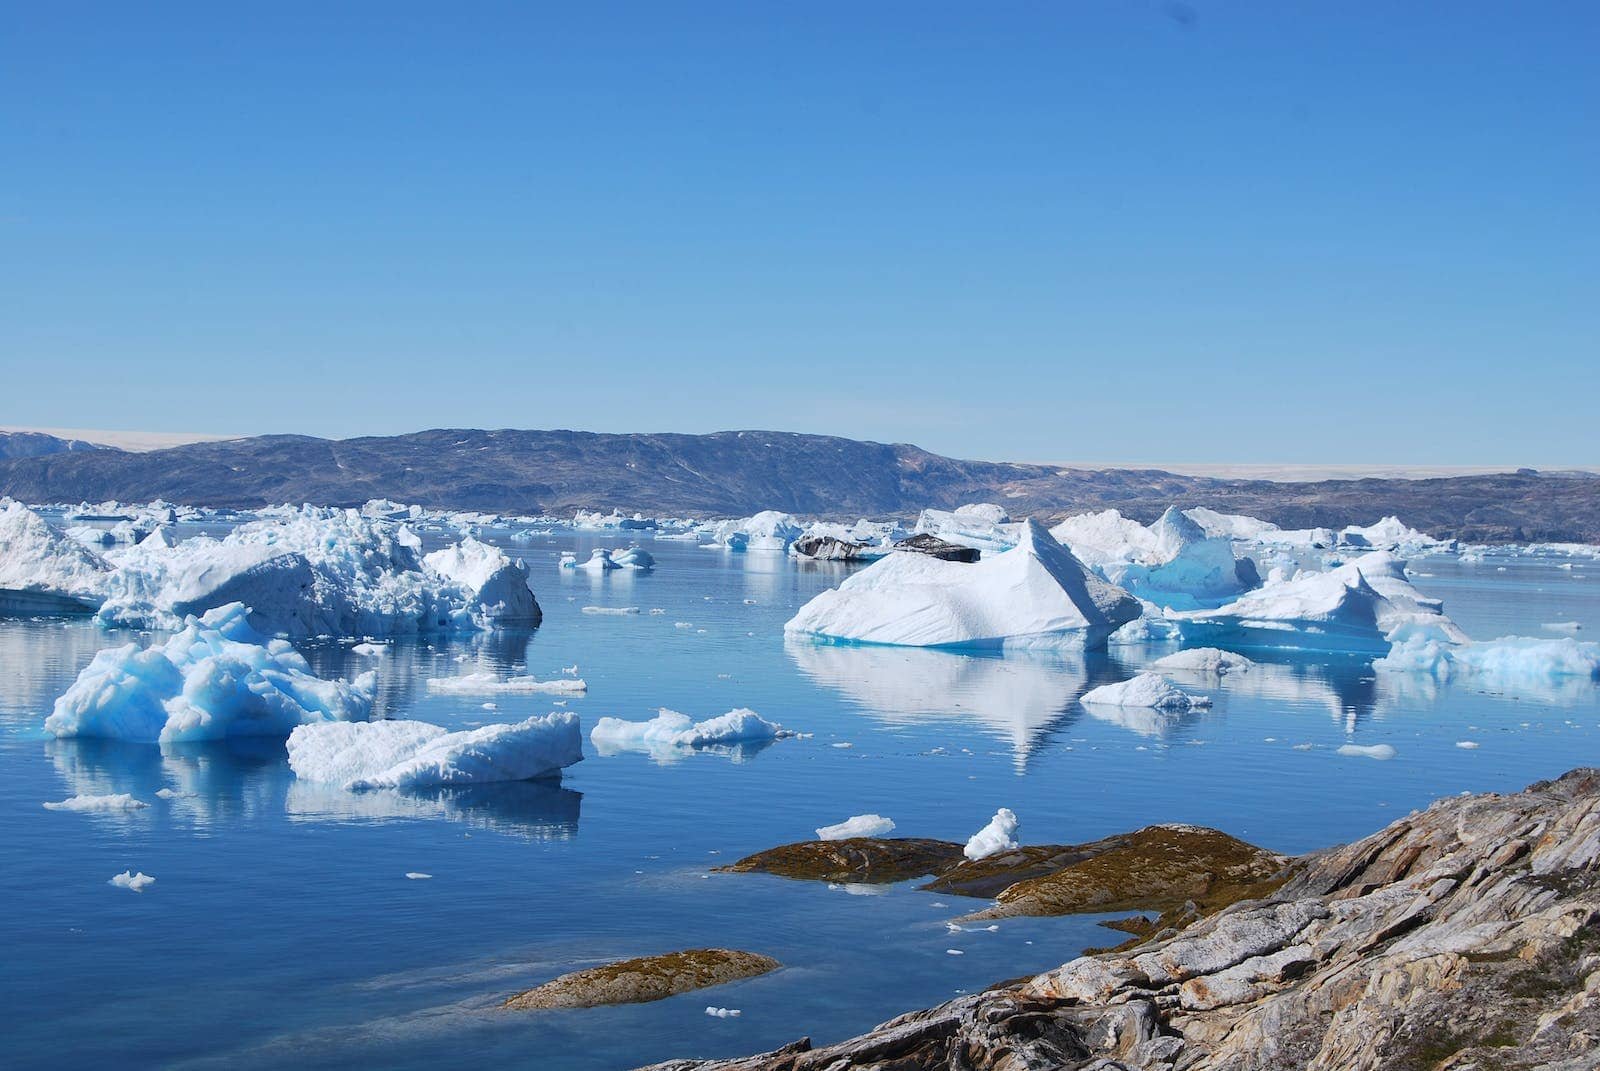 Melting glaciers caused by global warming